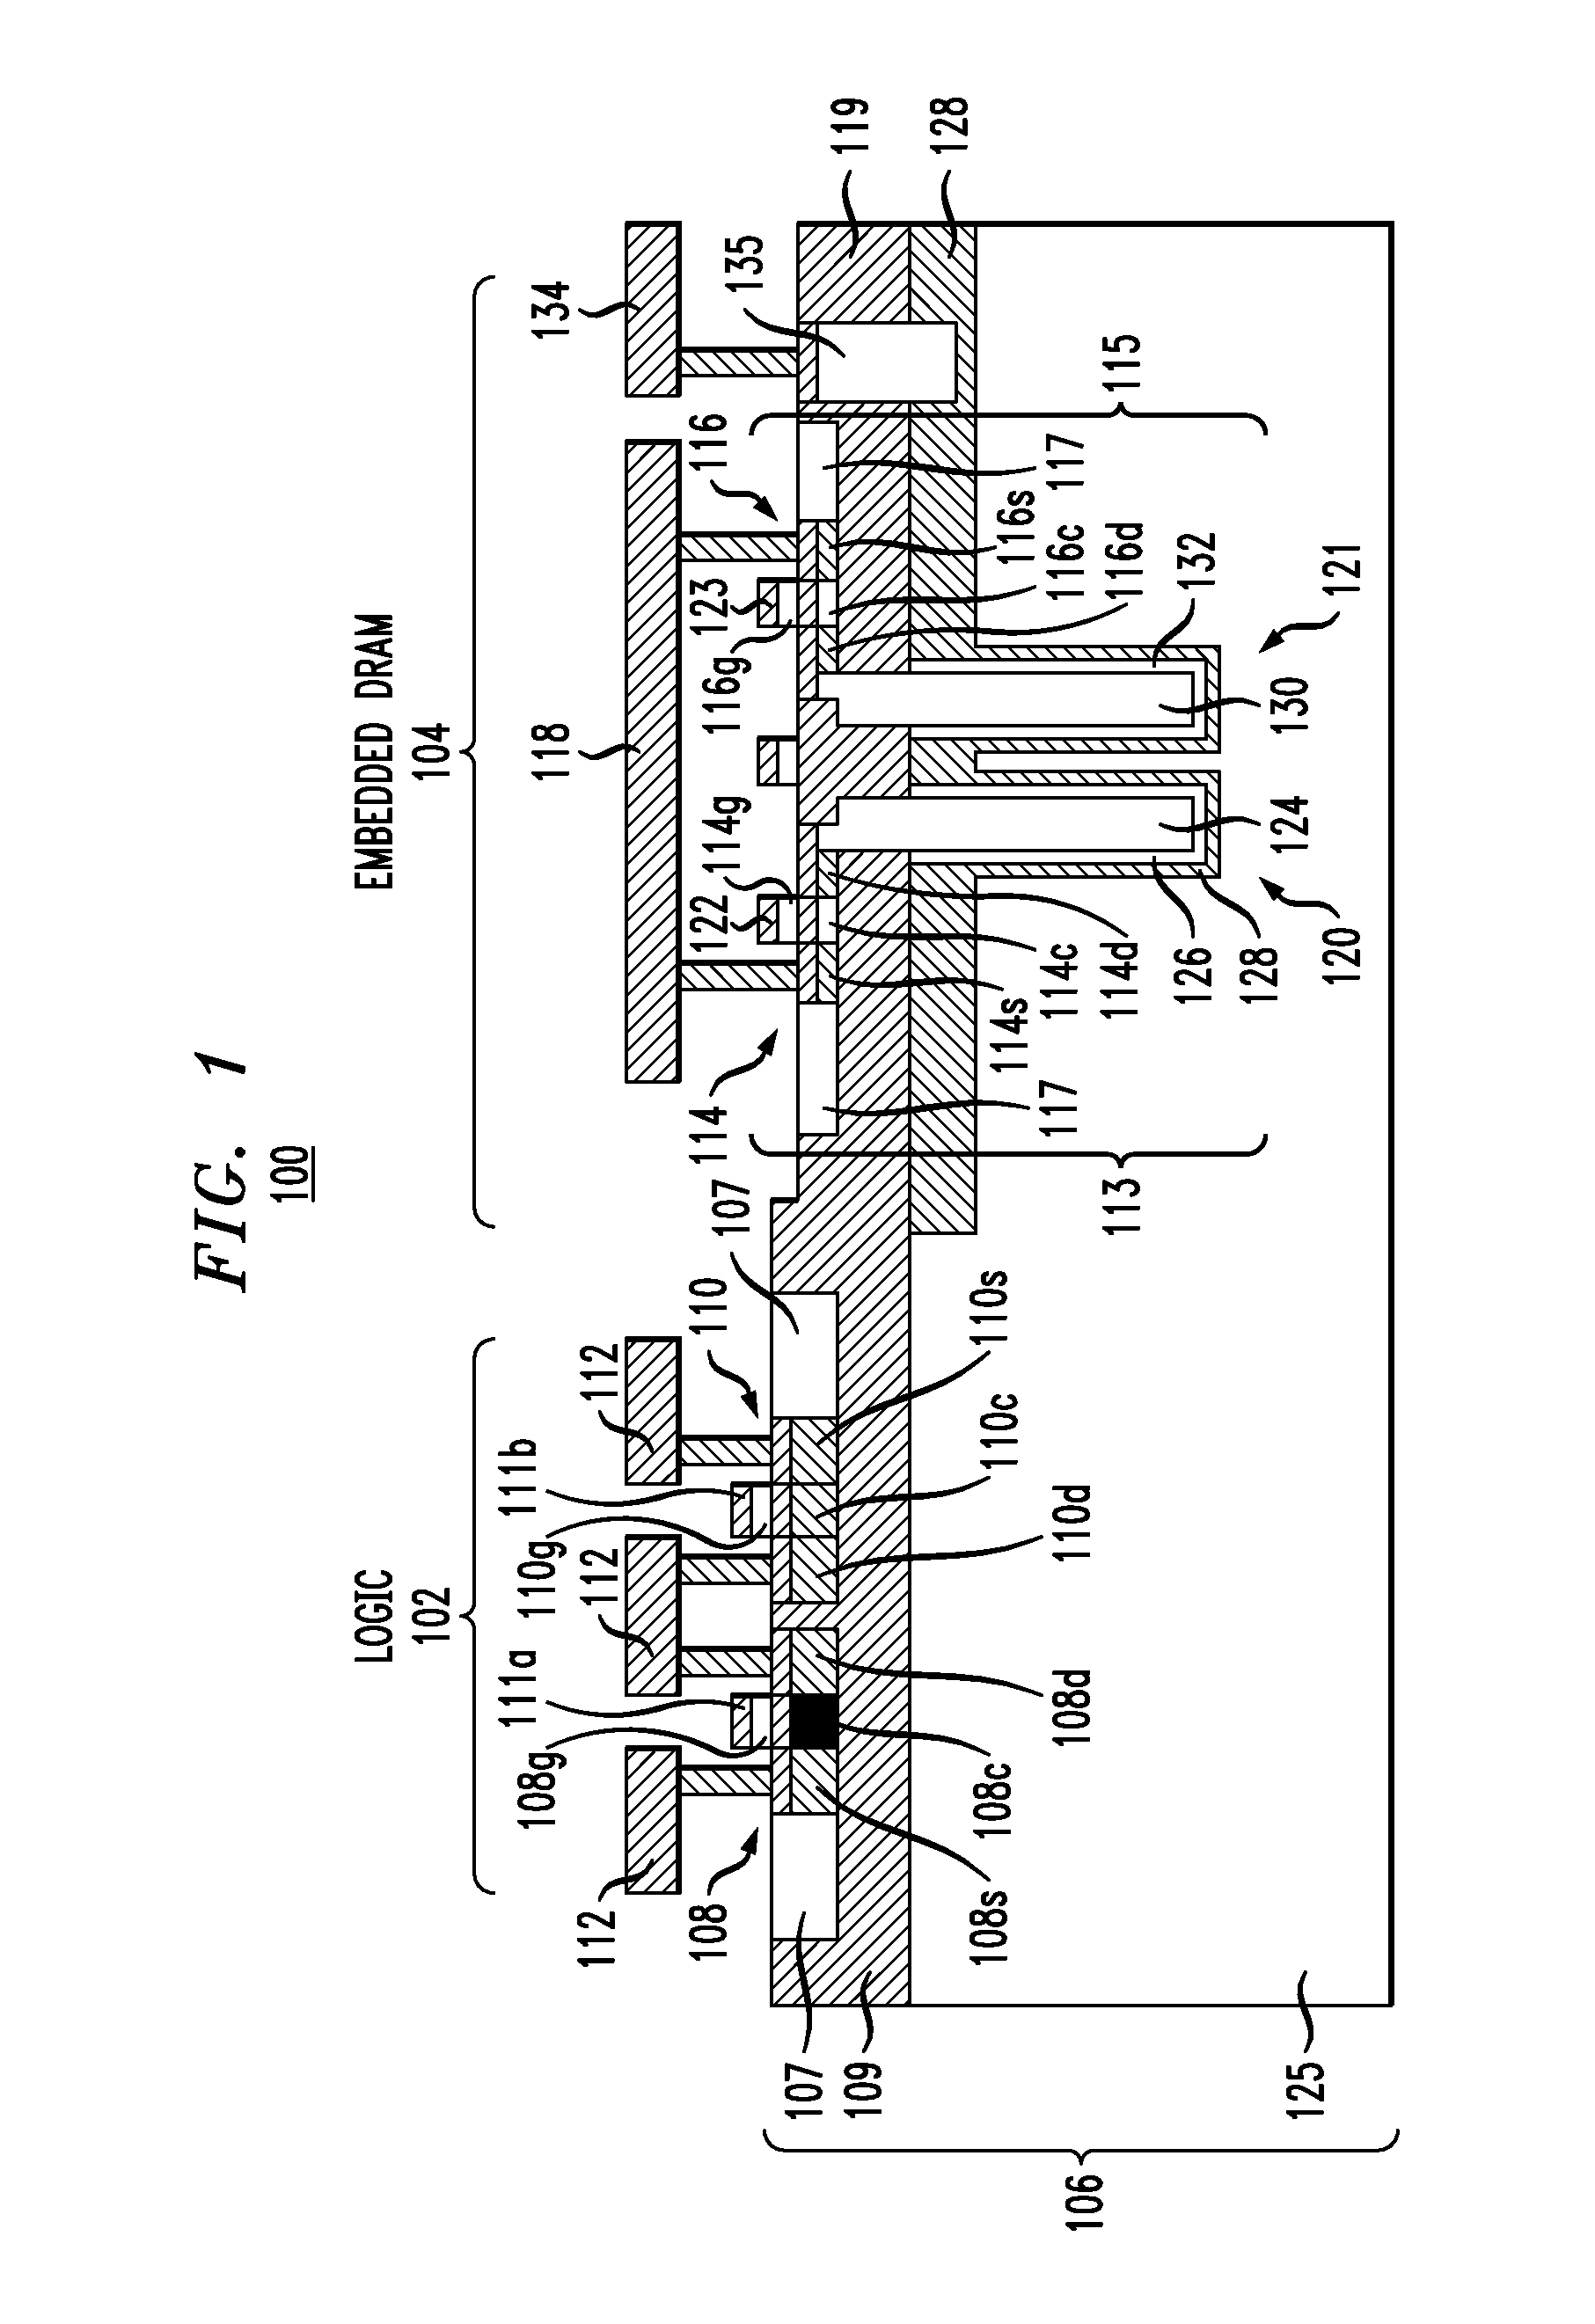 Embedded DRAM Integrated Circuits With Extremely Thin Silicon-On-Insulator Pass Transistors